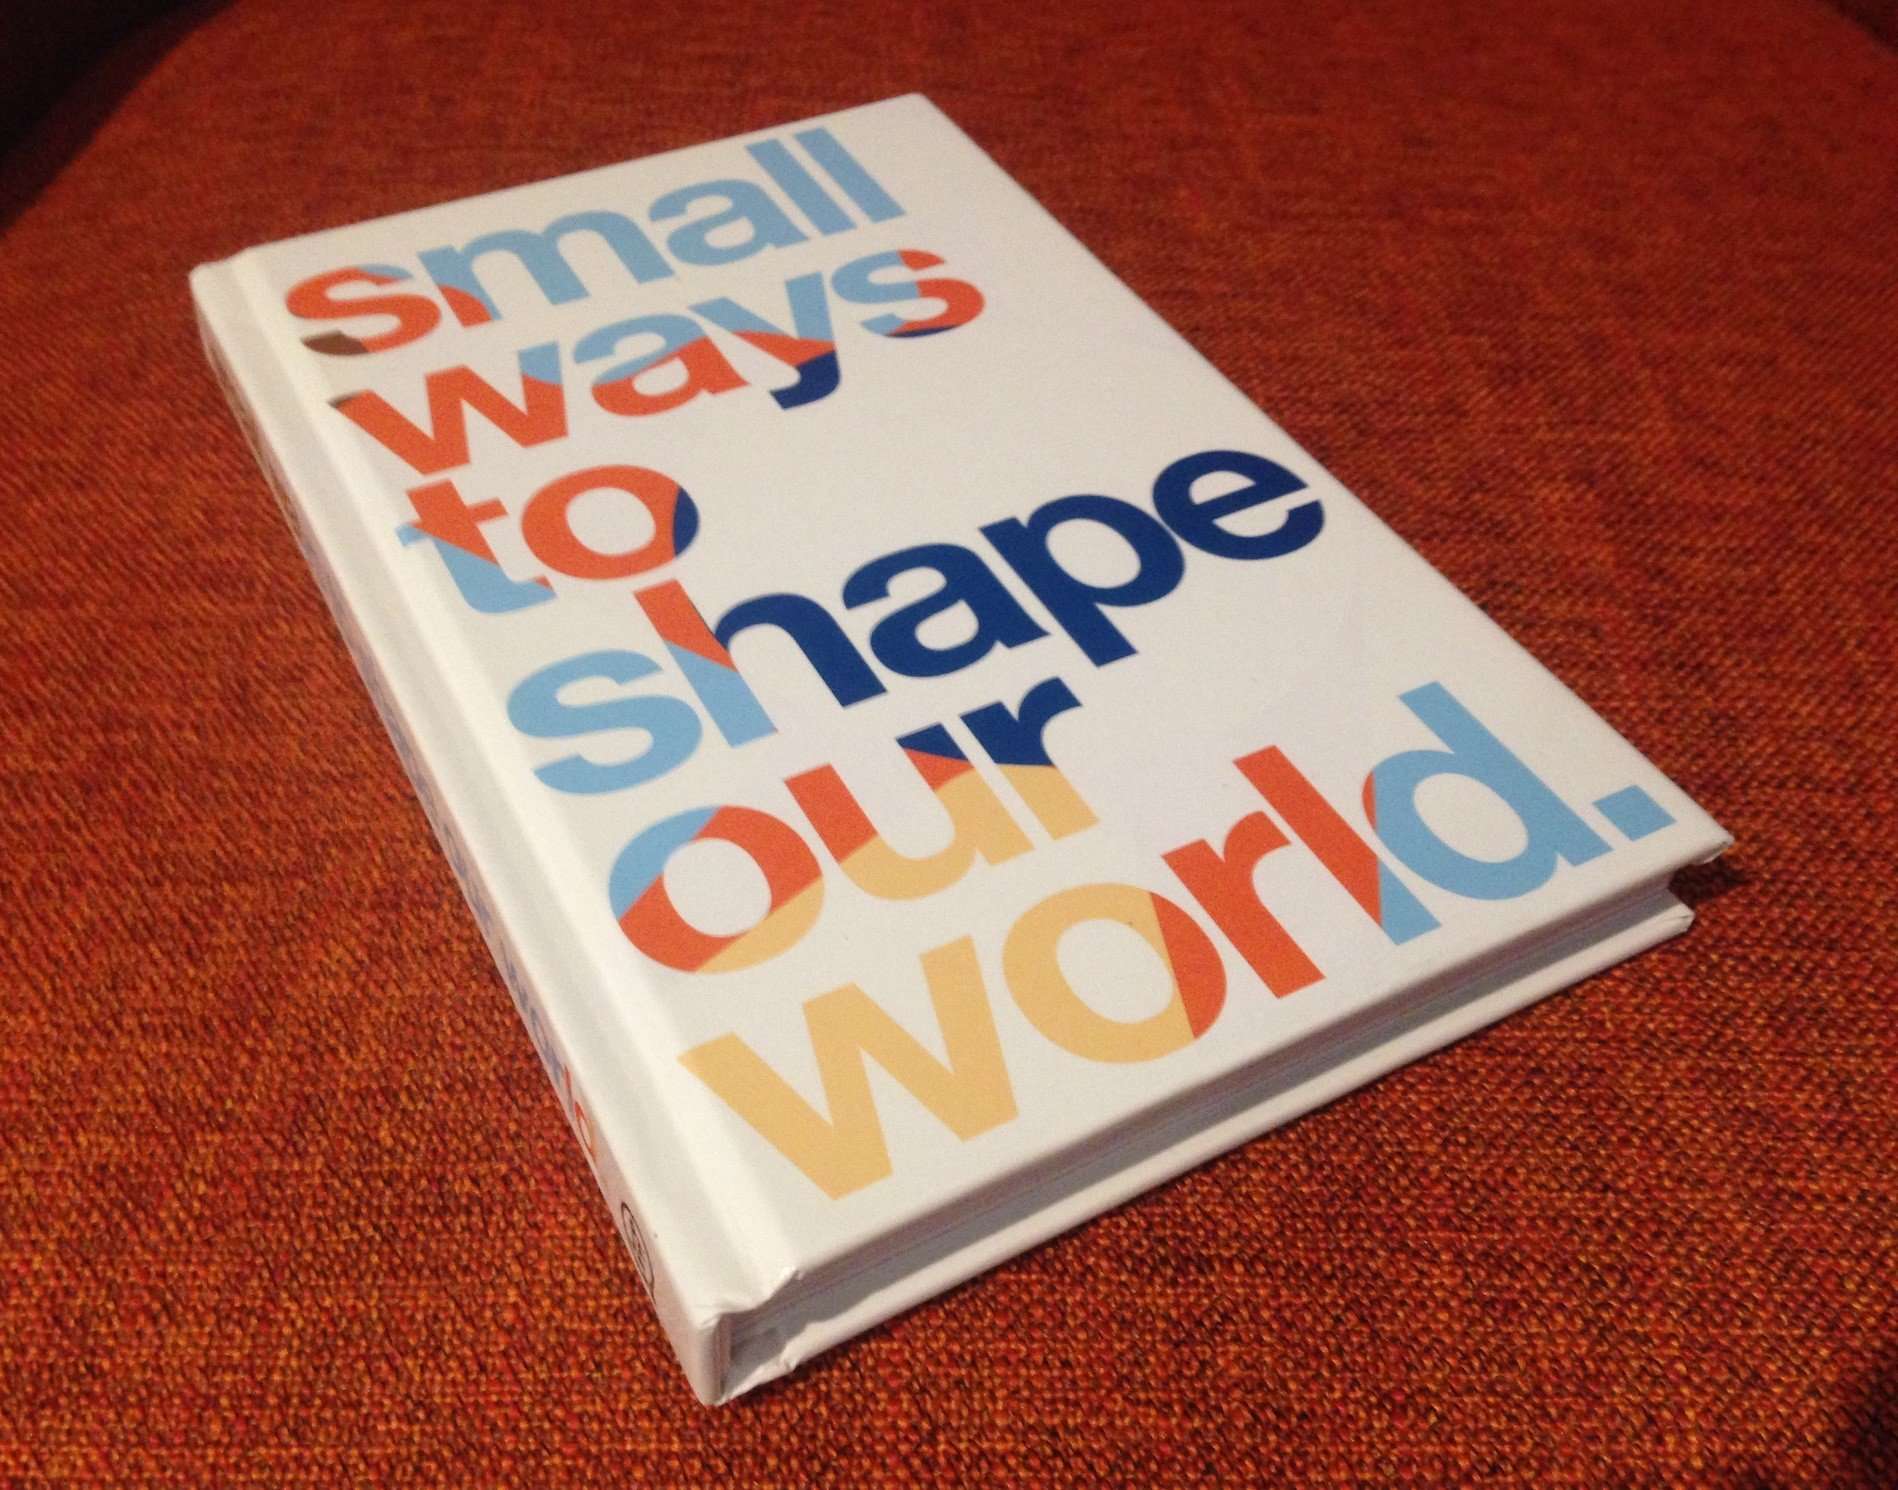 Igniting Change - Small Ways to Shape Our World